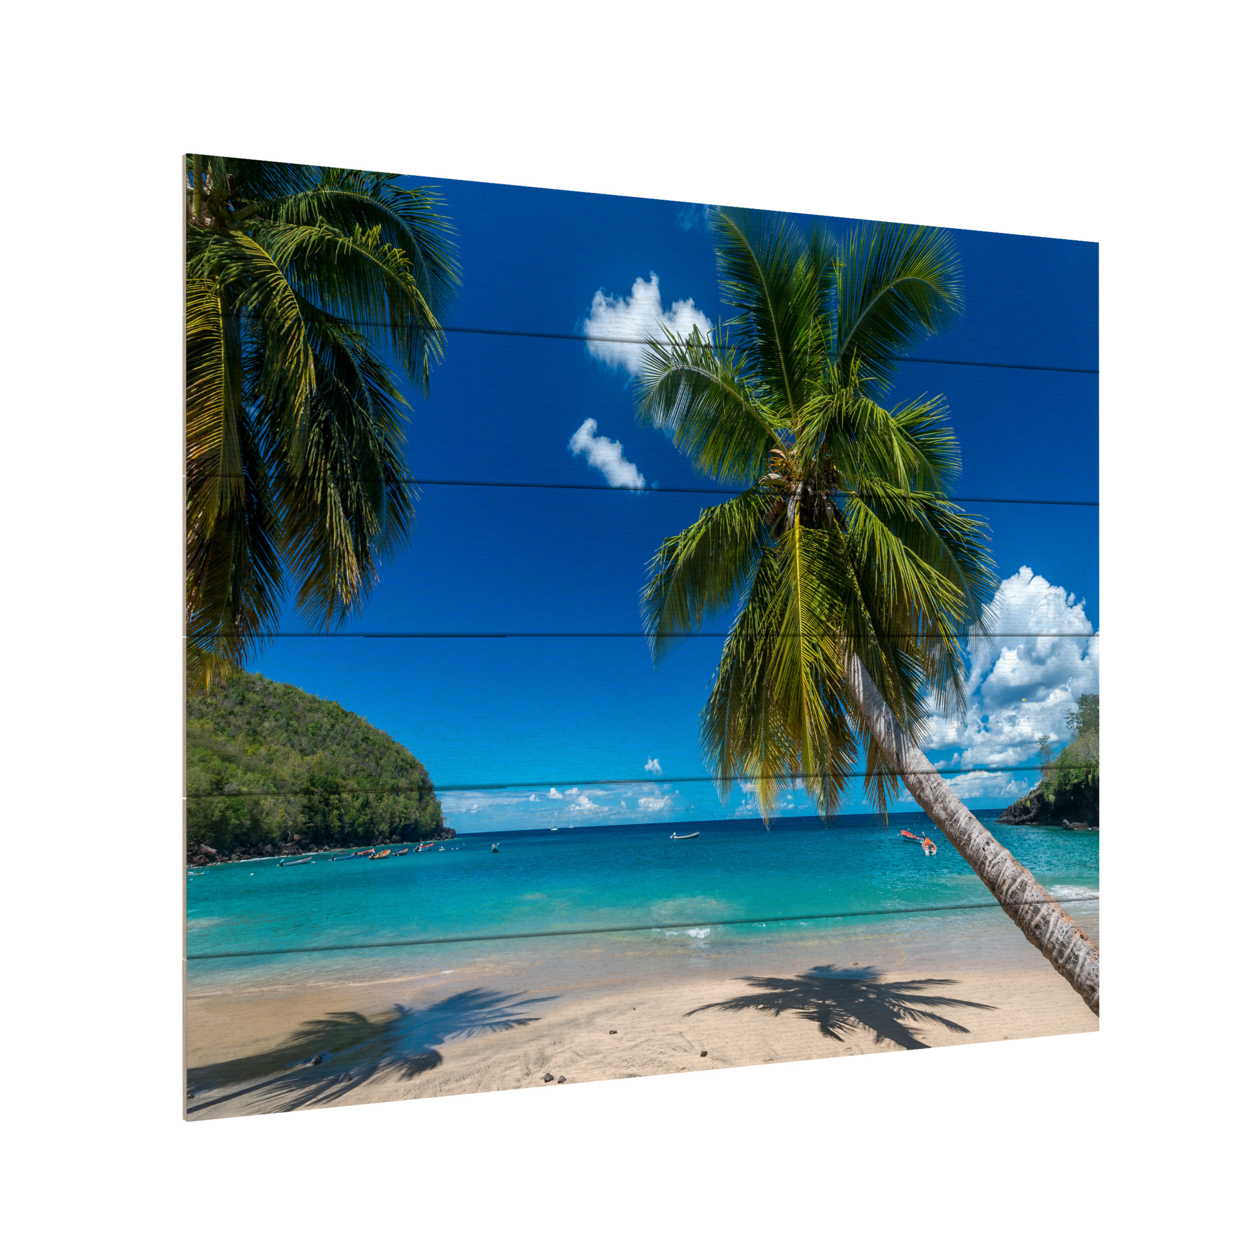 Wooden Slat Art 18 X 22 Inches Titled Martinique Ready To Hang Home Decor Picture